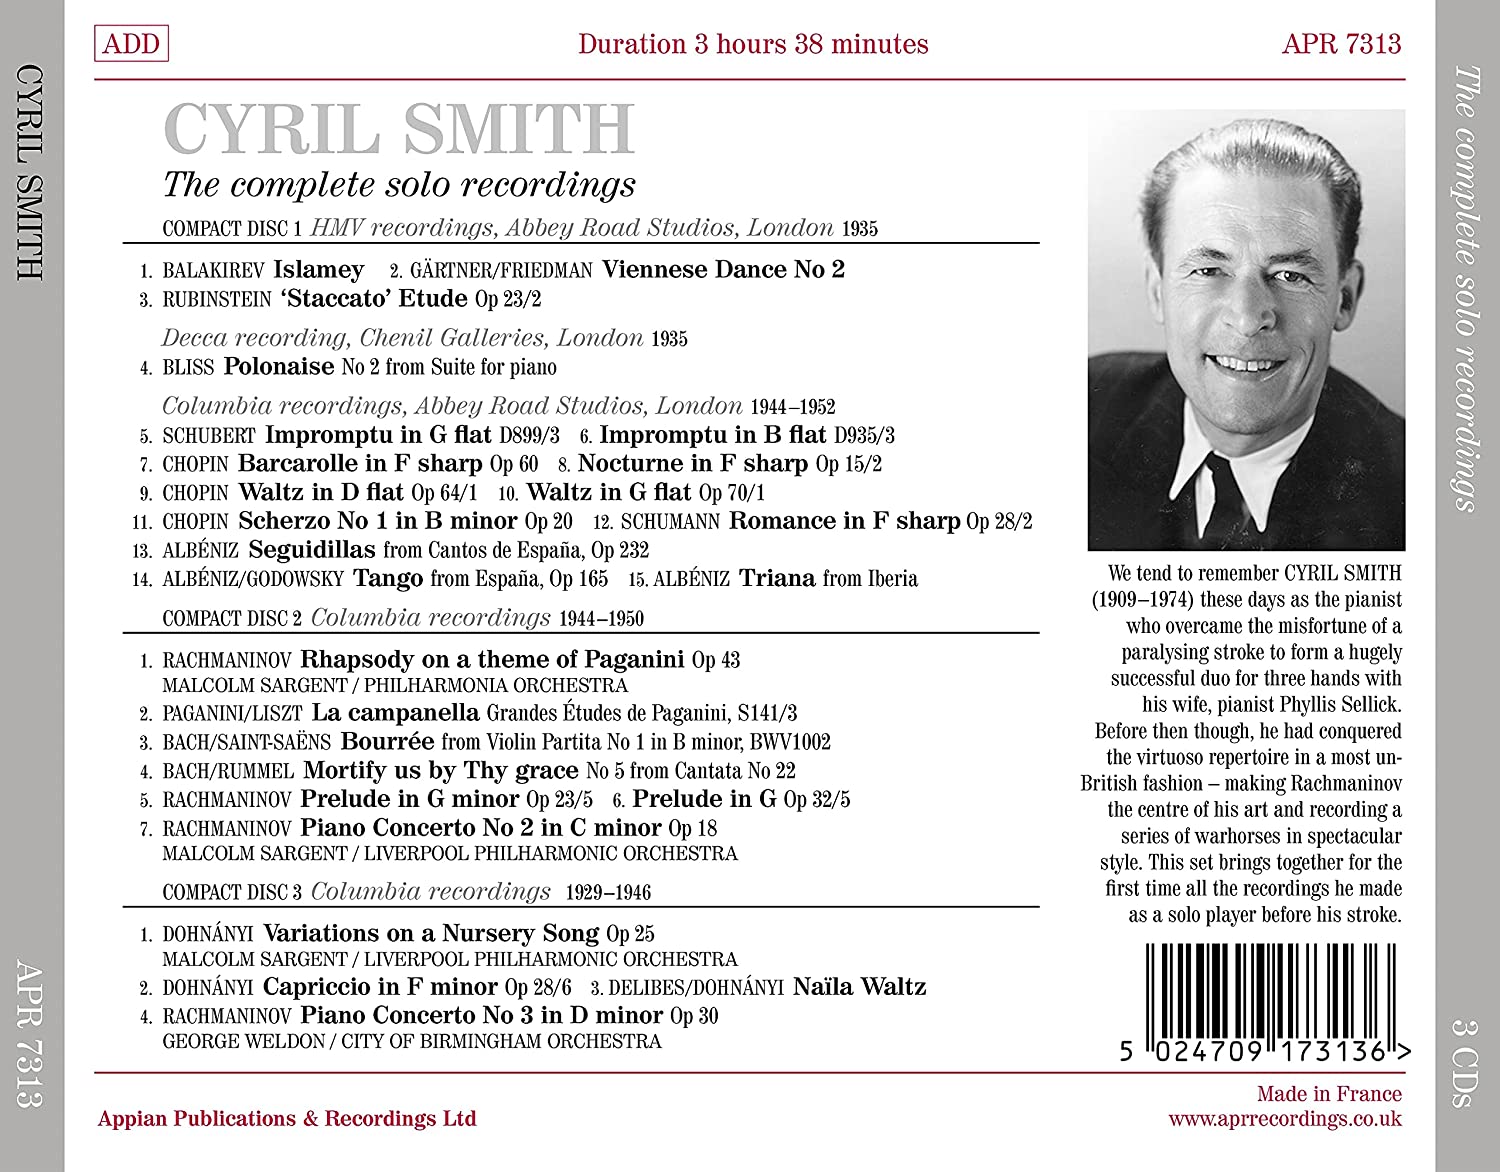 Cyril Smith 시릴 스미스 - 솔로 녹음집 (The Complete Solo Recordings) 